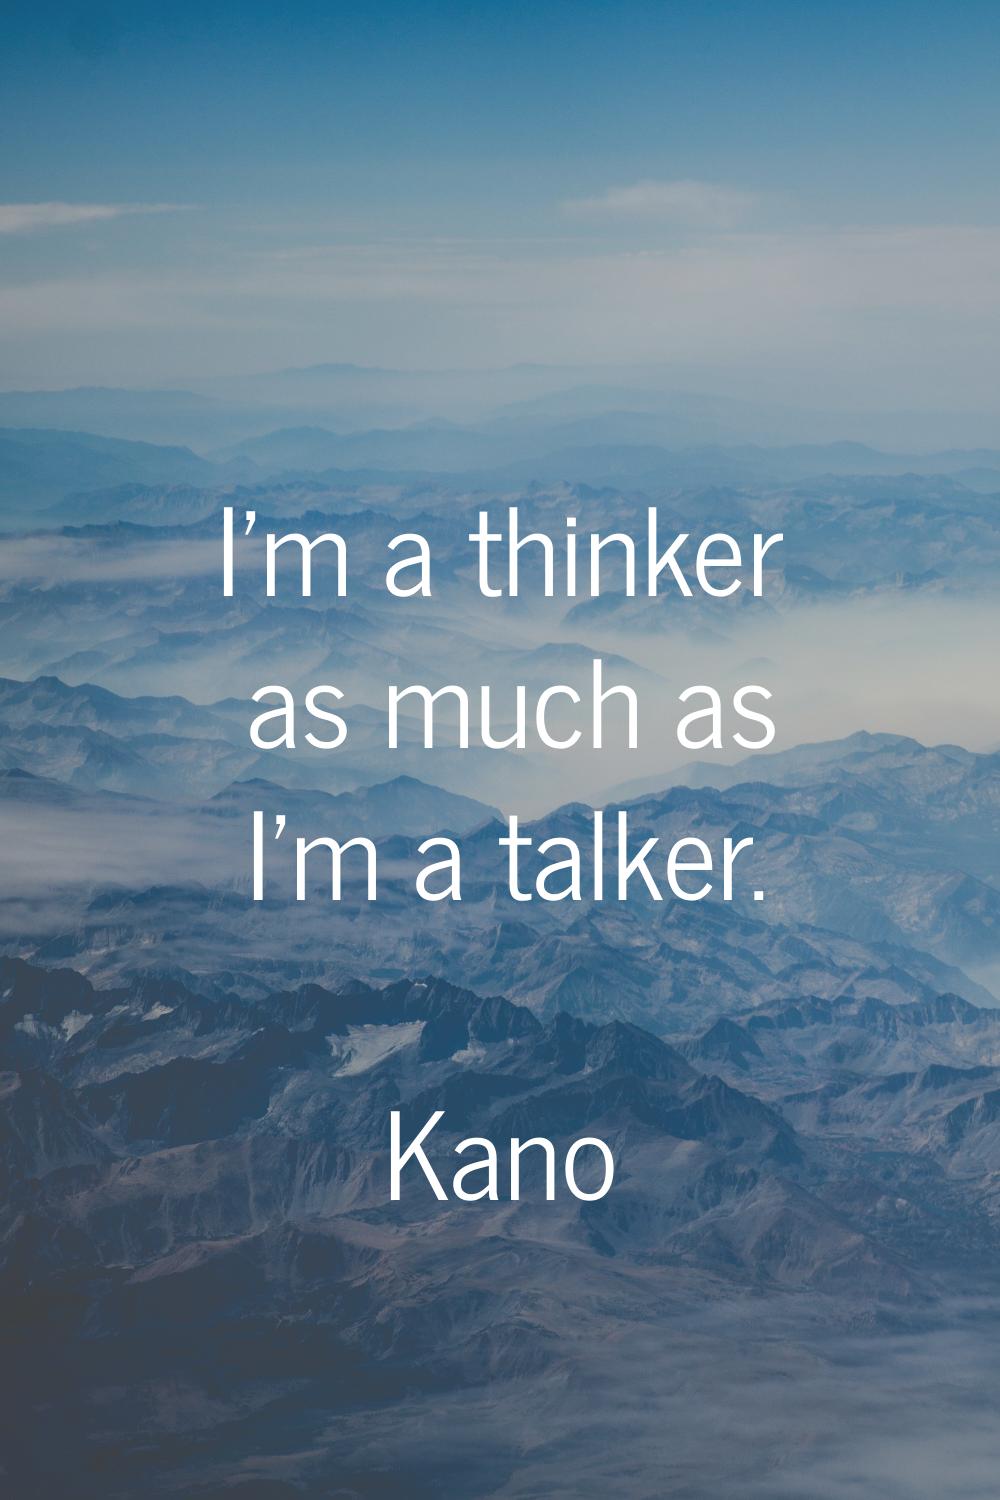 I'm a thinker as much as I'm a talker.